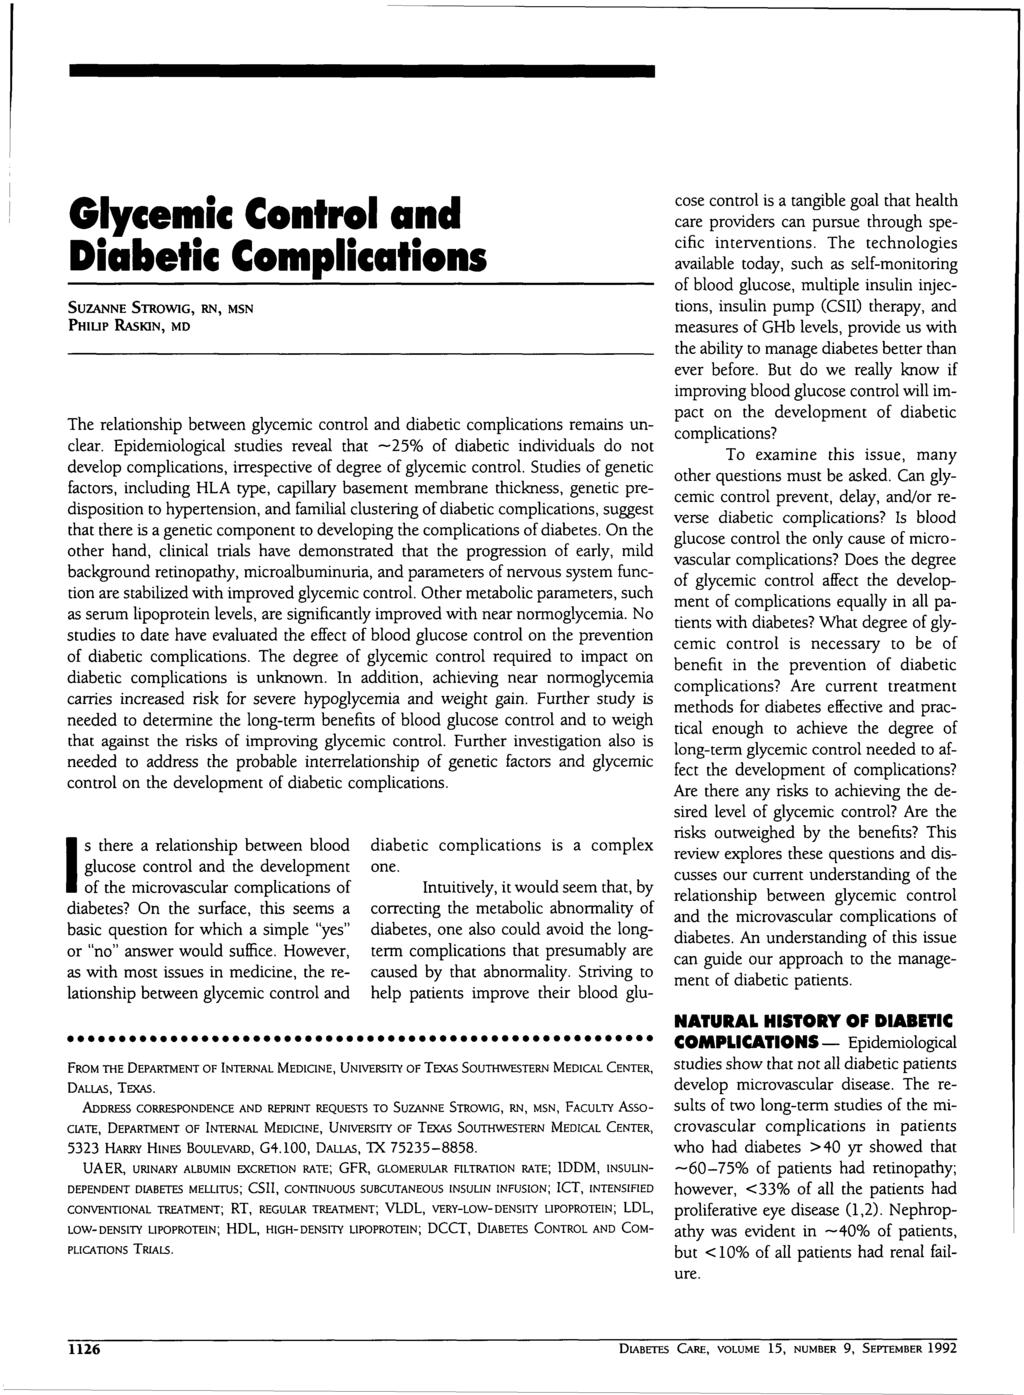 Glycemic Control and Diabetic Complications SUZANNE STROWIG, RN, MSN PHIUP RASKIN, MD The relationship between glycemic control and diabetic complications remains unclear.